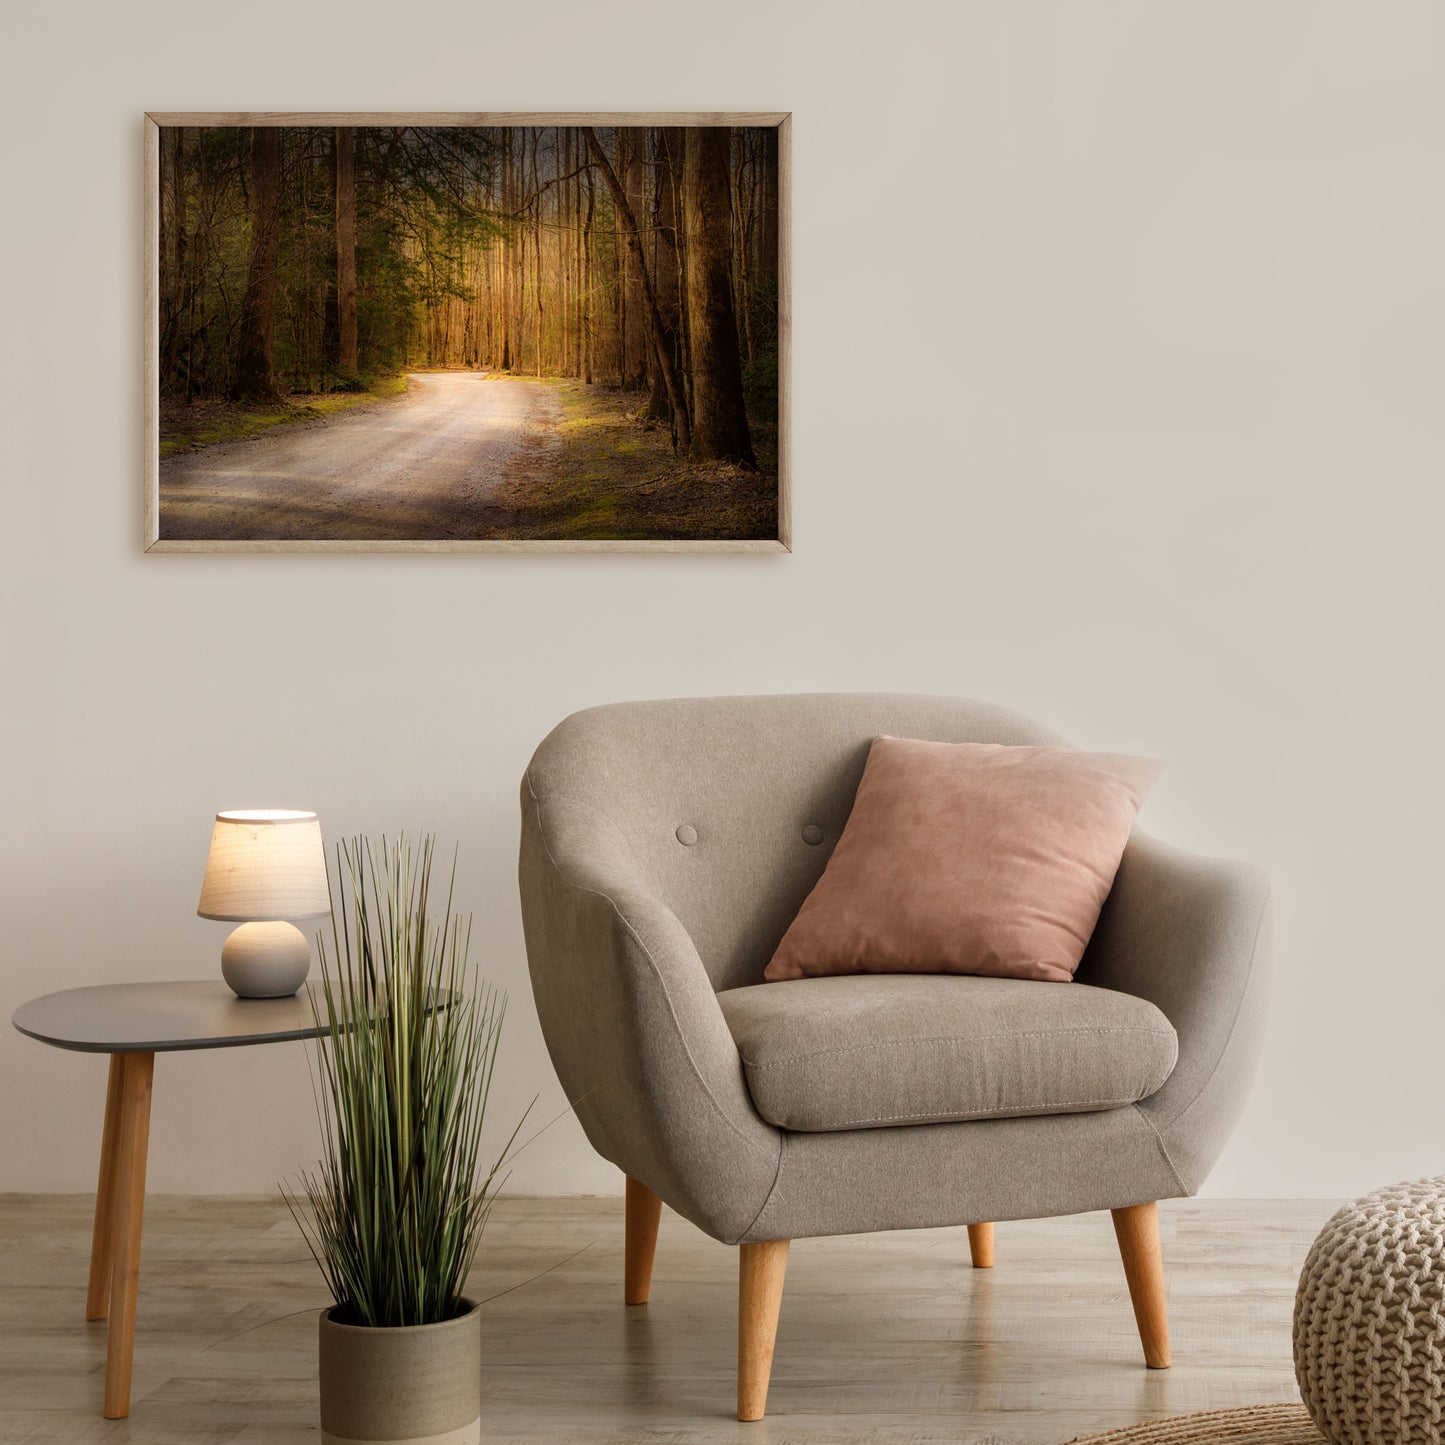 Smoky mountain wall art print featuring a road in the national park